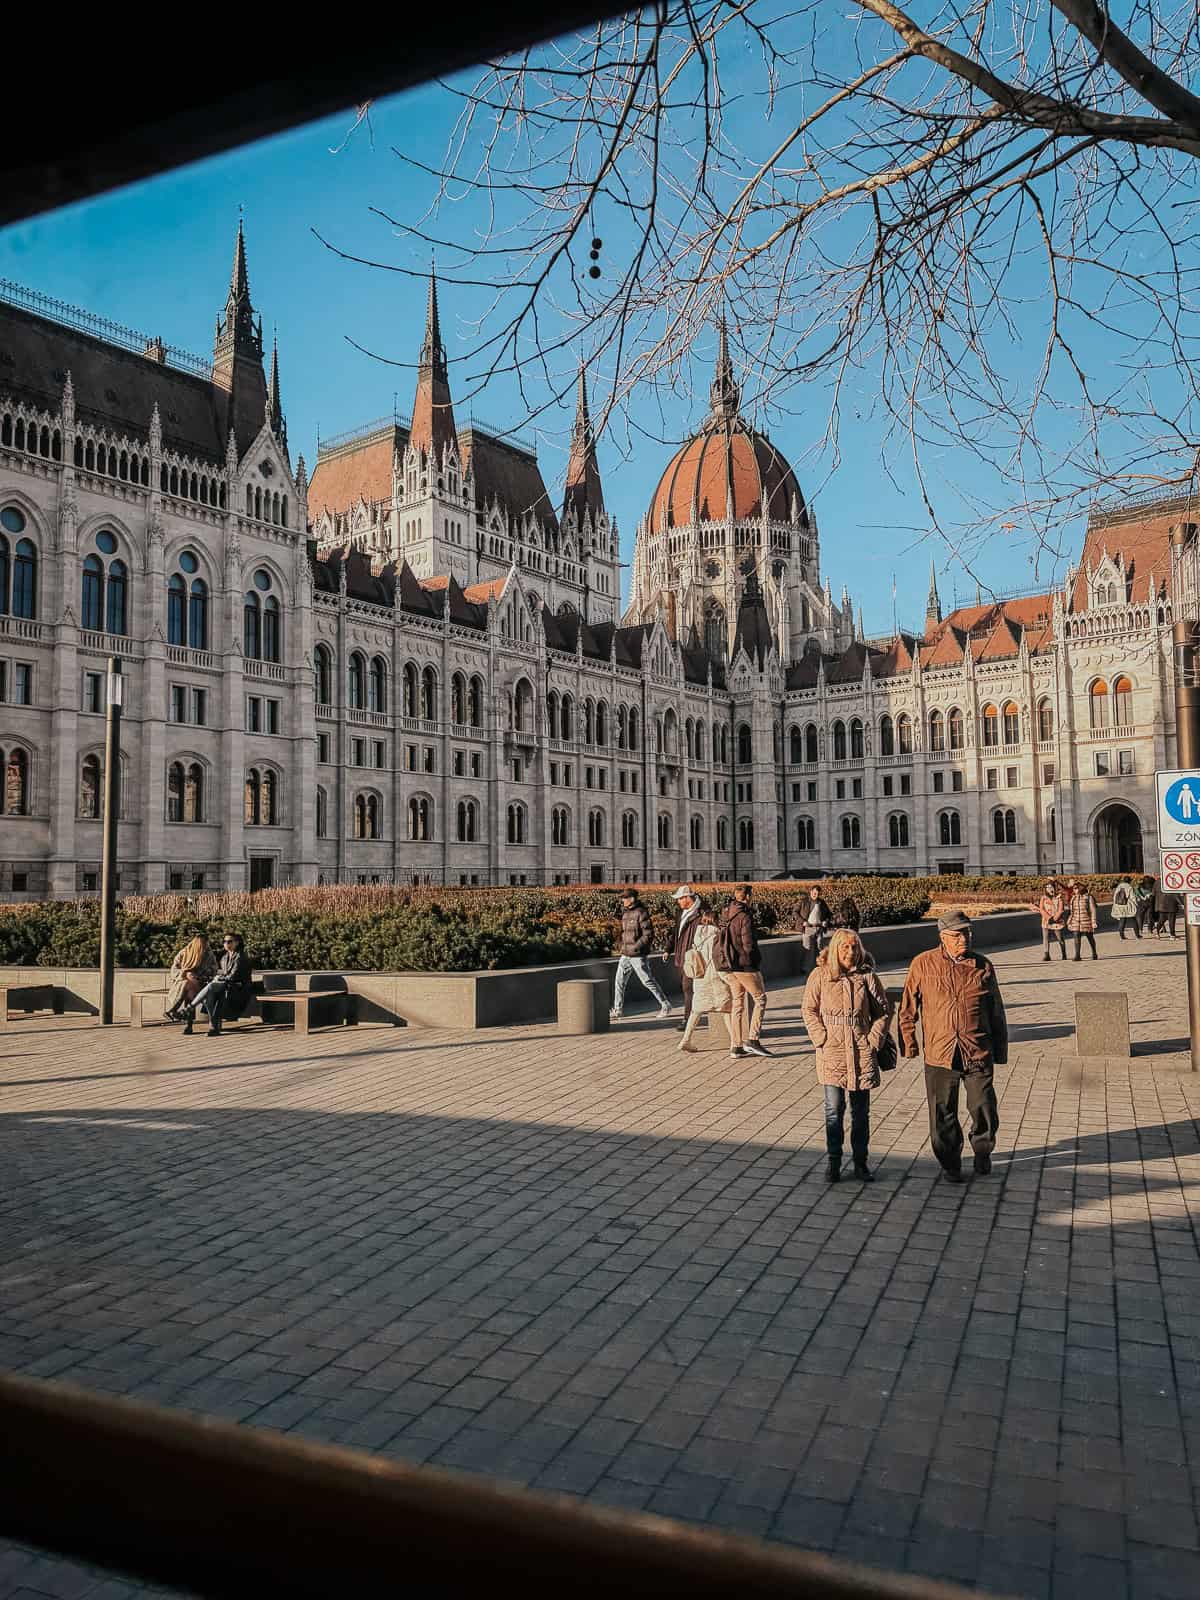 View of the Hungarian Parliament Building in Budapest, with its gothic architecture and red dome, seen from inside a tram. Pedestrians walk and sit in the foreground plaza under a clear blue sky.